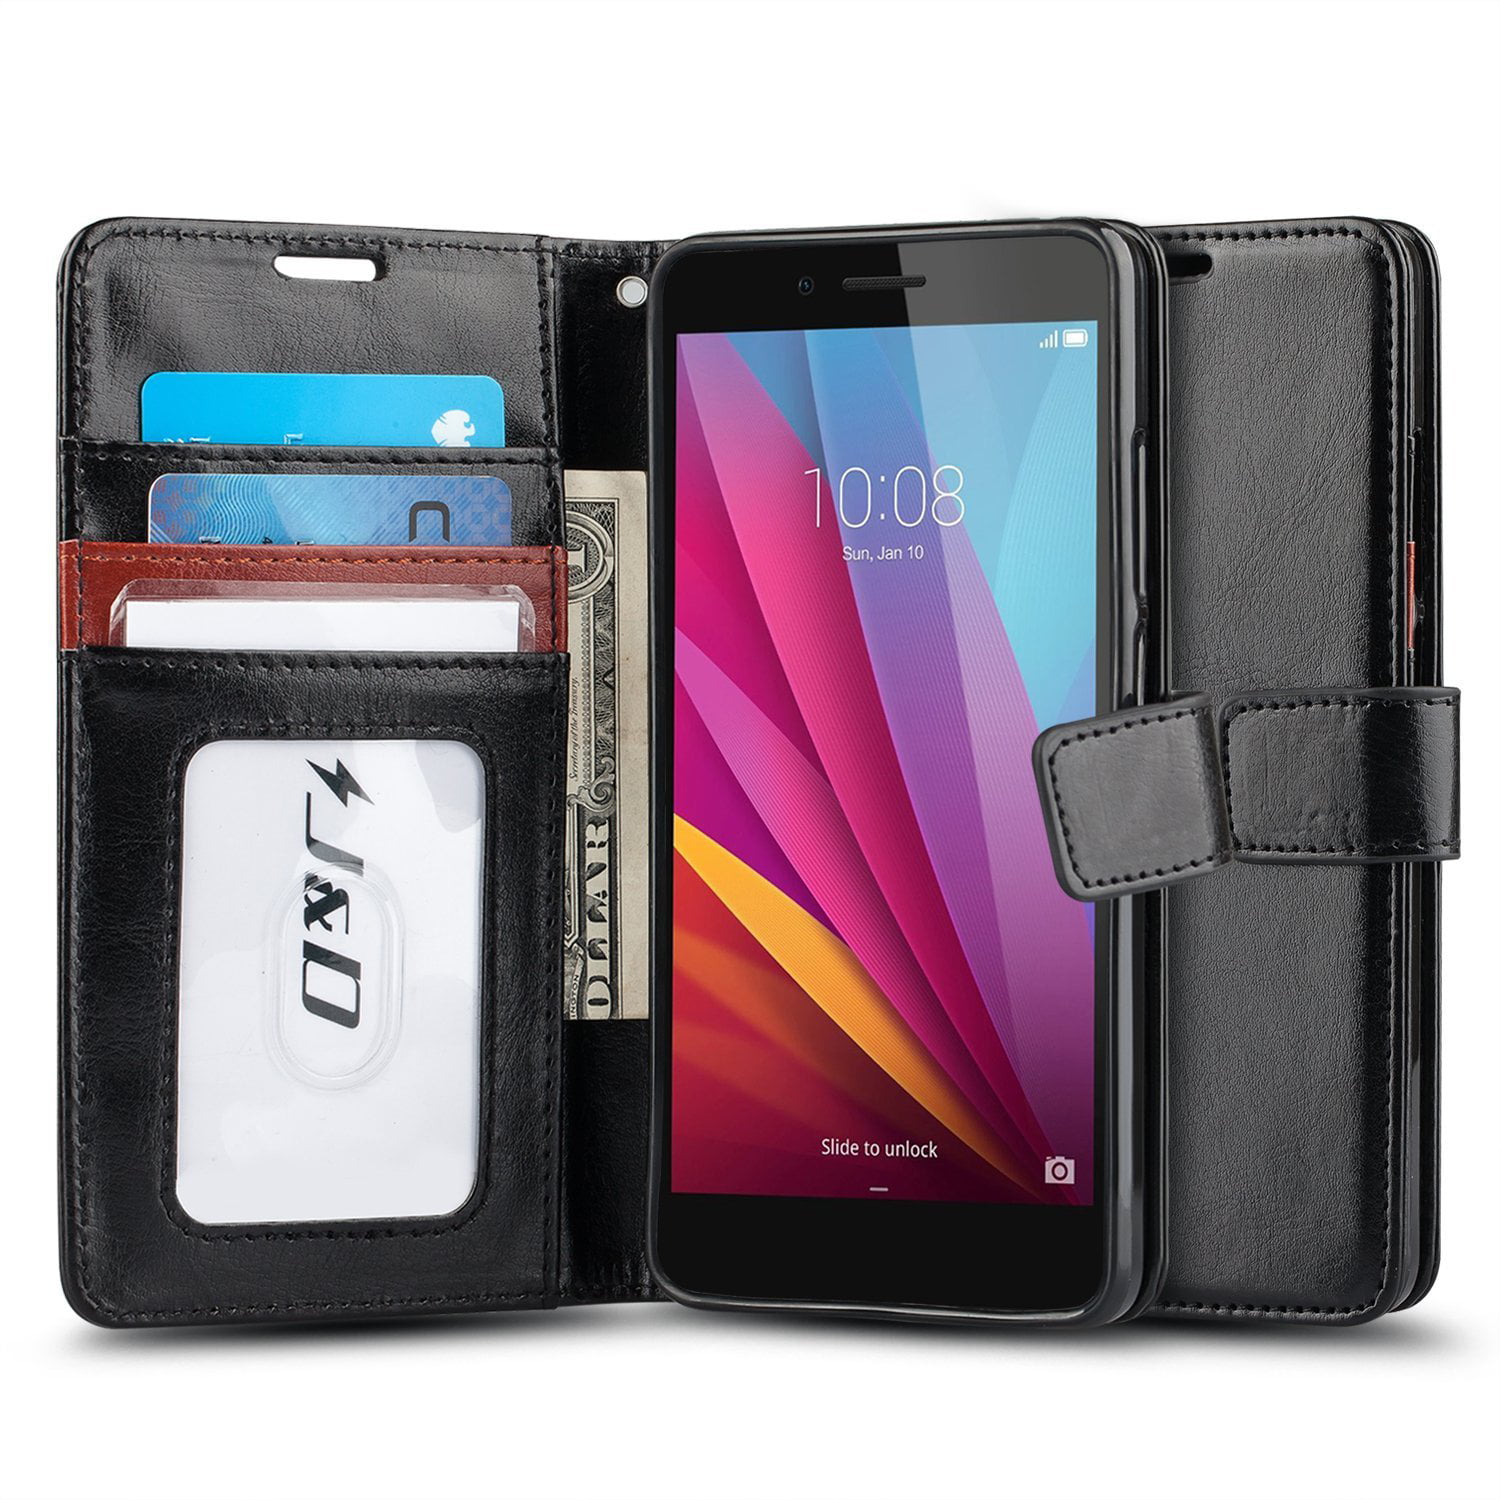 Virus slinger mond Honor 5X Case, J&D [Wallet Stand] Huawei Honor 5X Wallet Case Heavy Duty  Protective Shock Resistant Case for Huawei Honor 5X - Black - Walmart.com